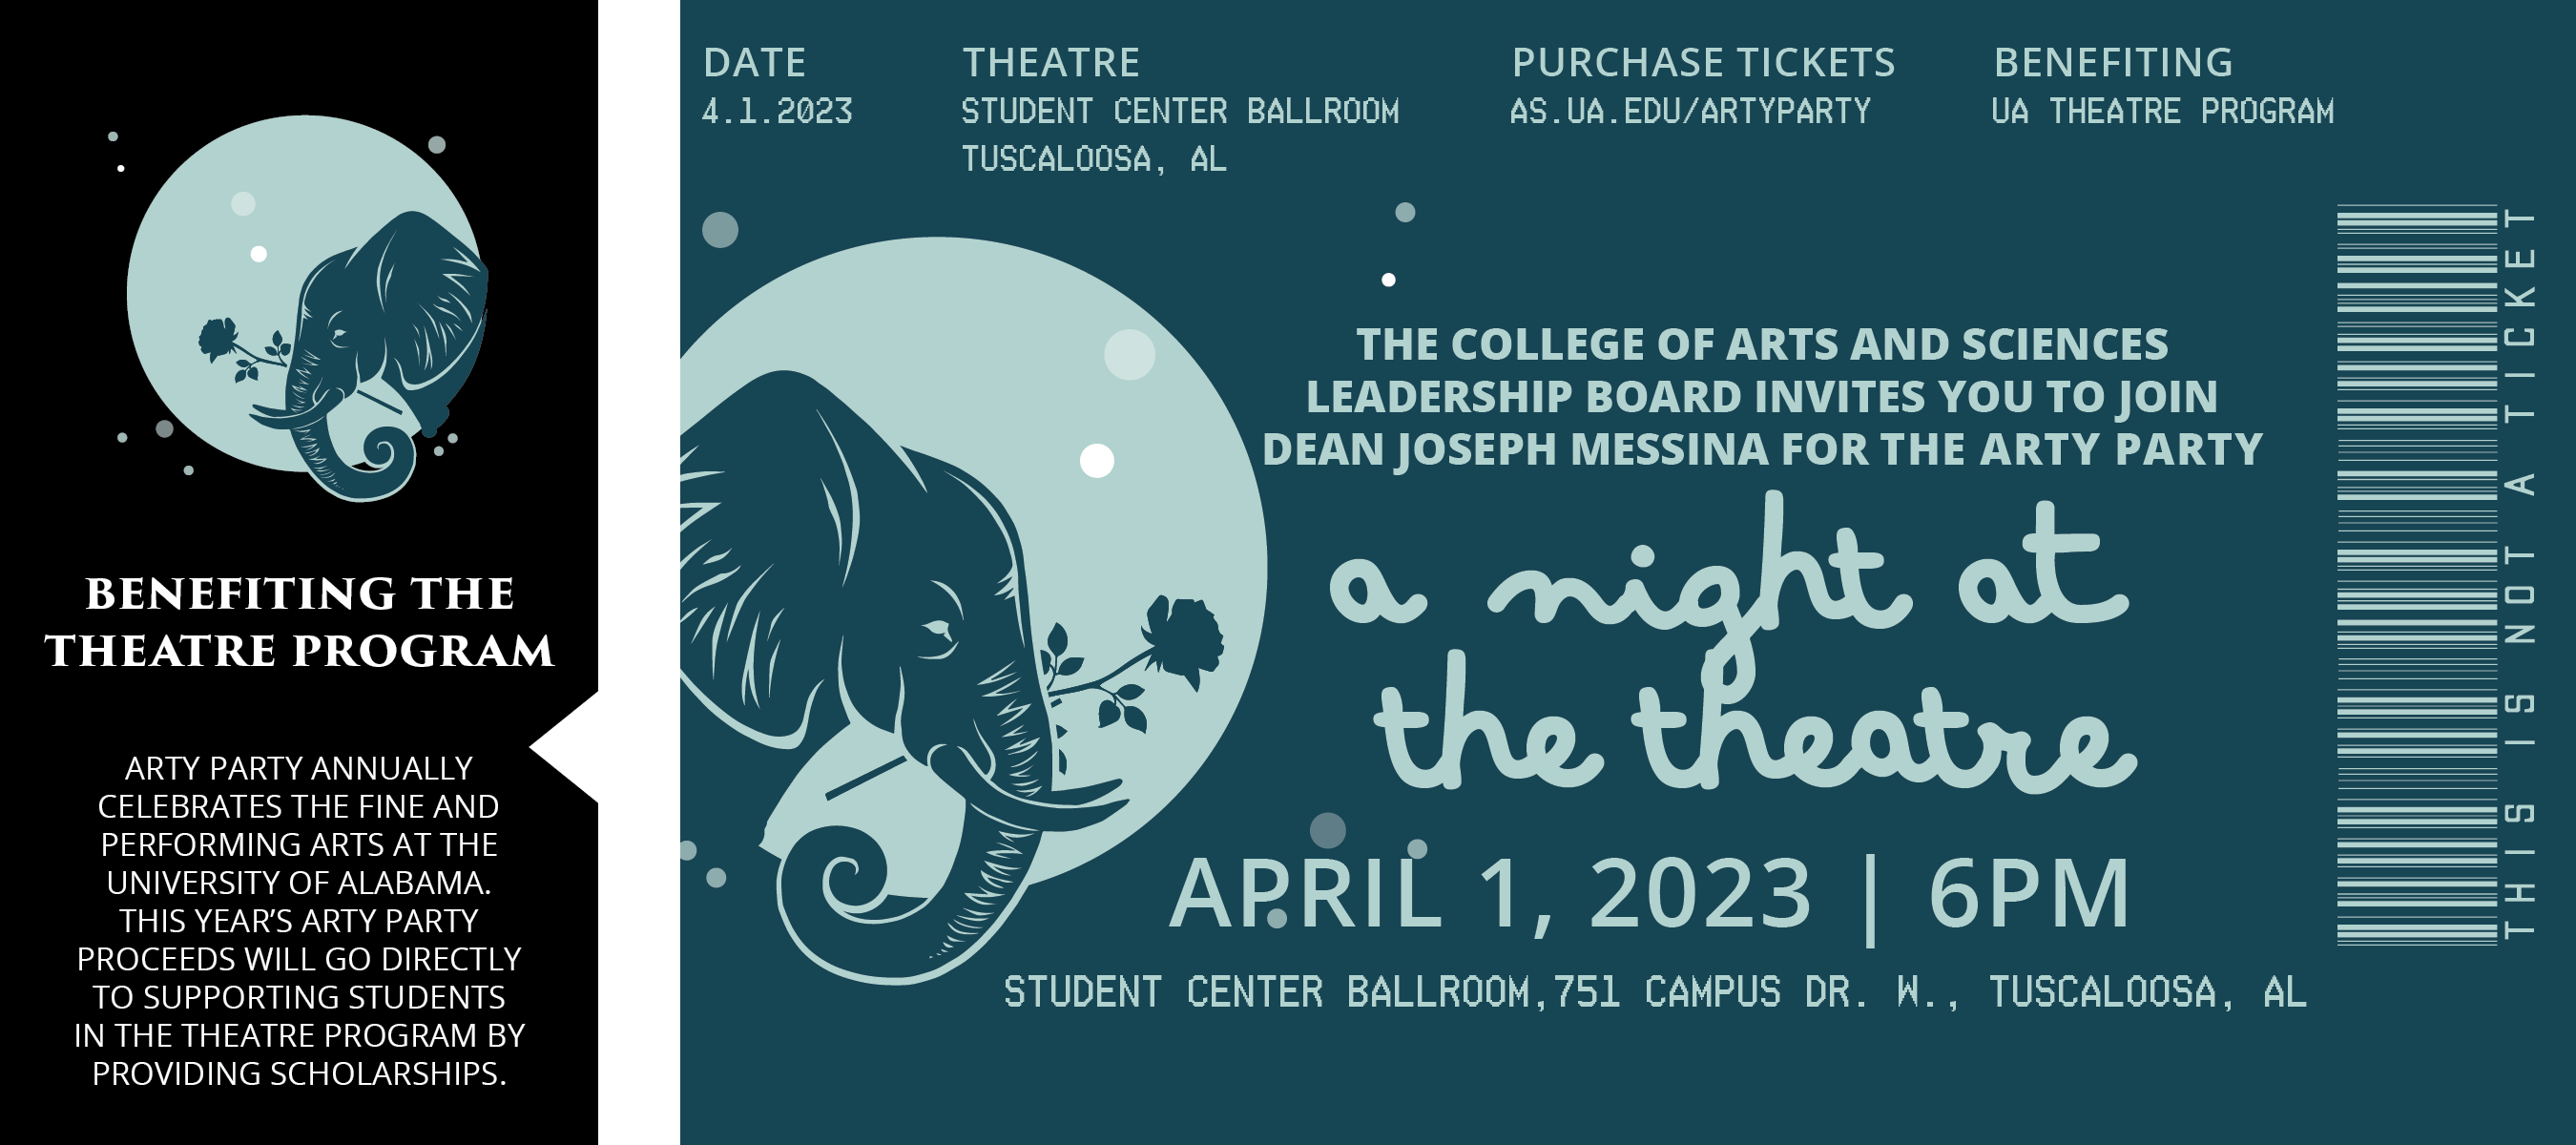 A Night at the Theatre, the 2023 Arty Party event benefiting the UA theatre program, April 1, 2023